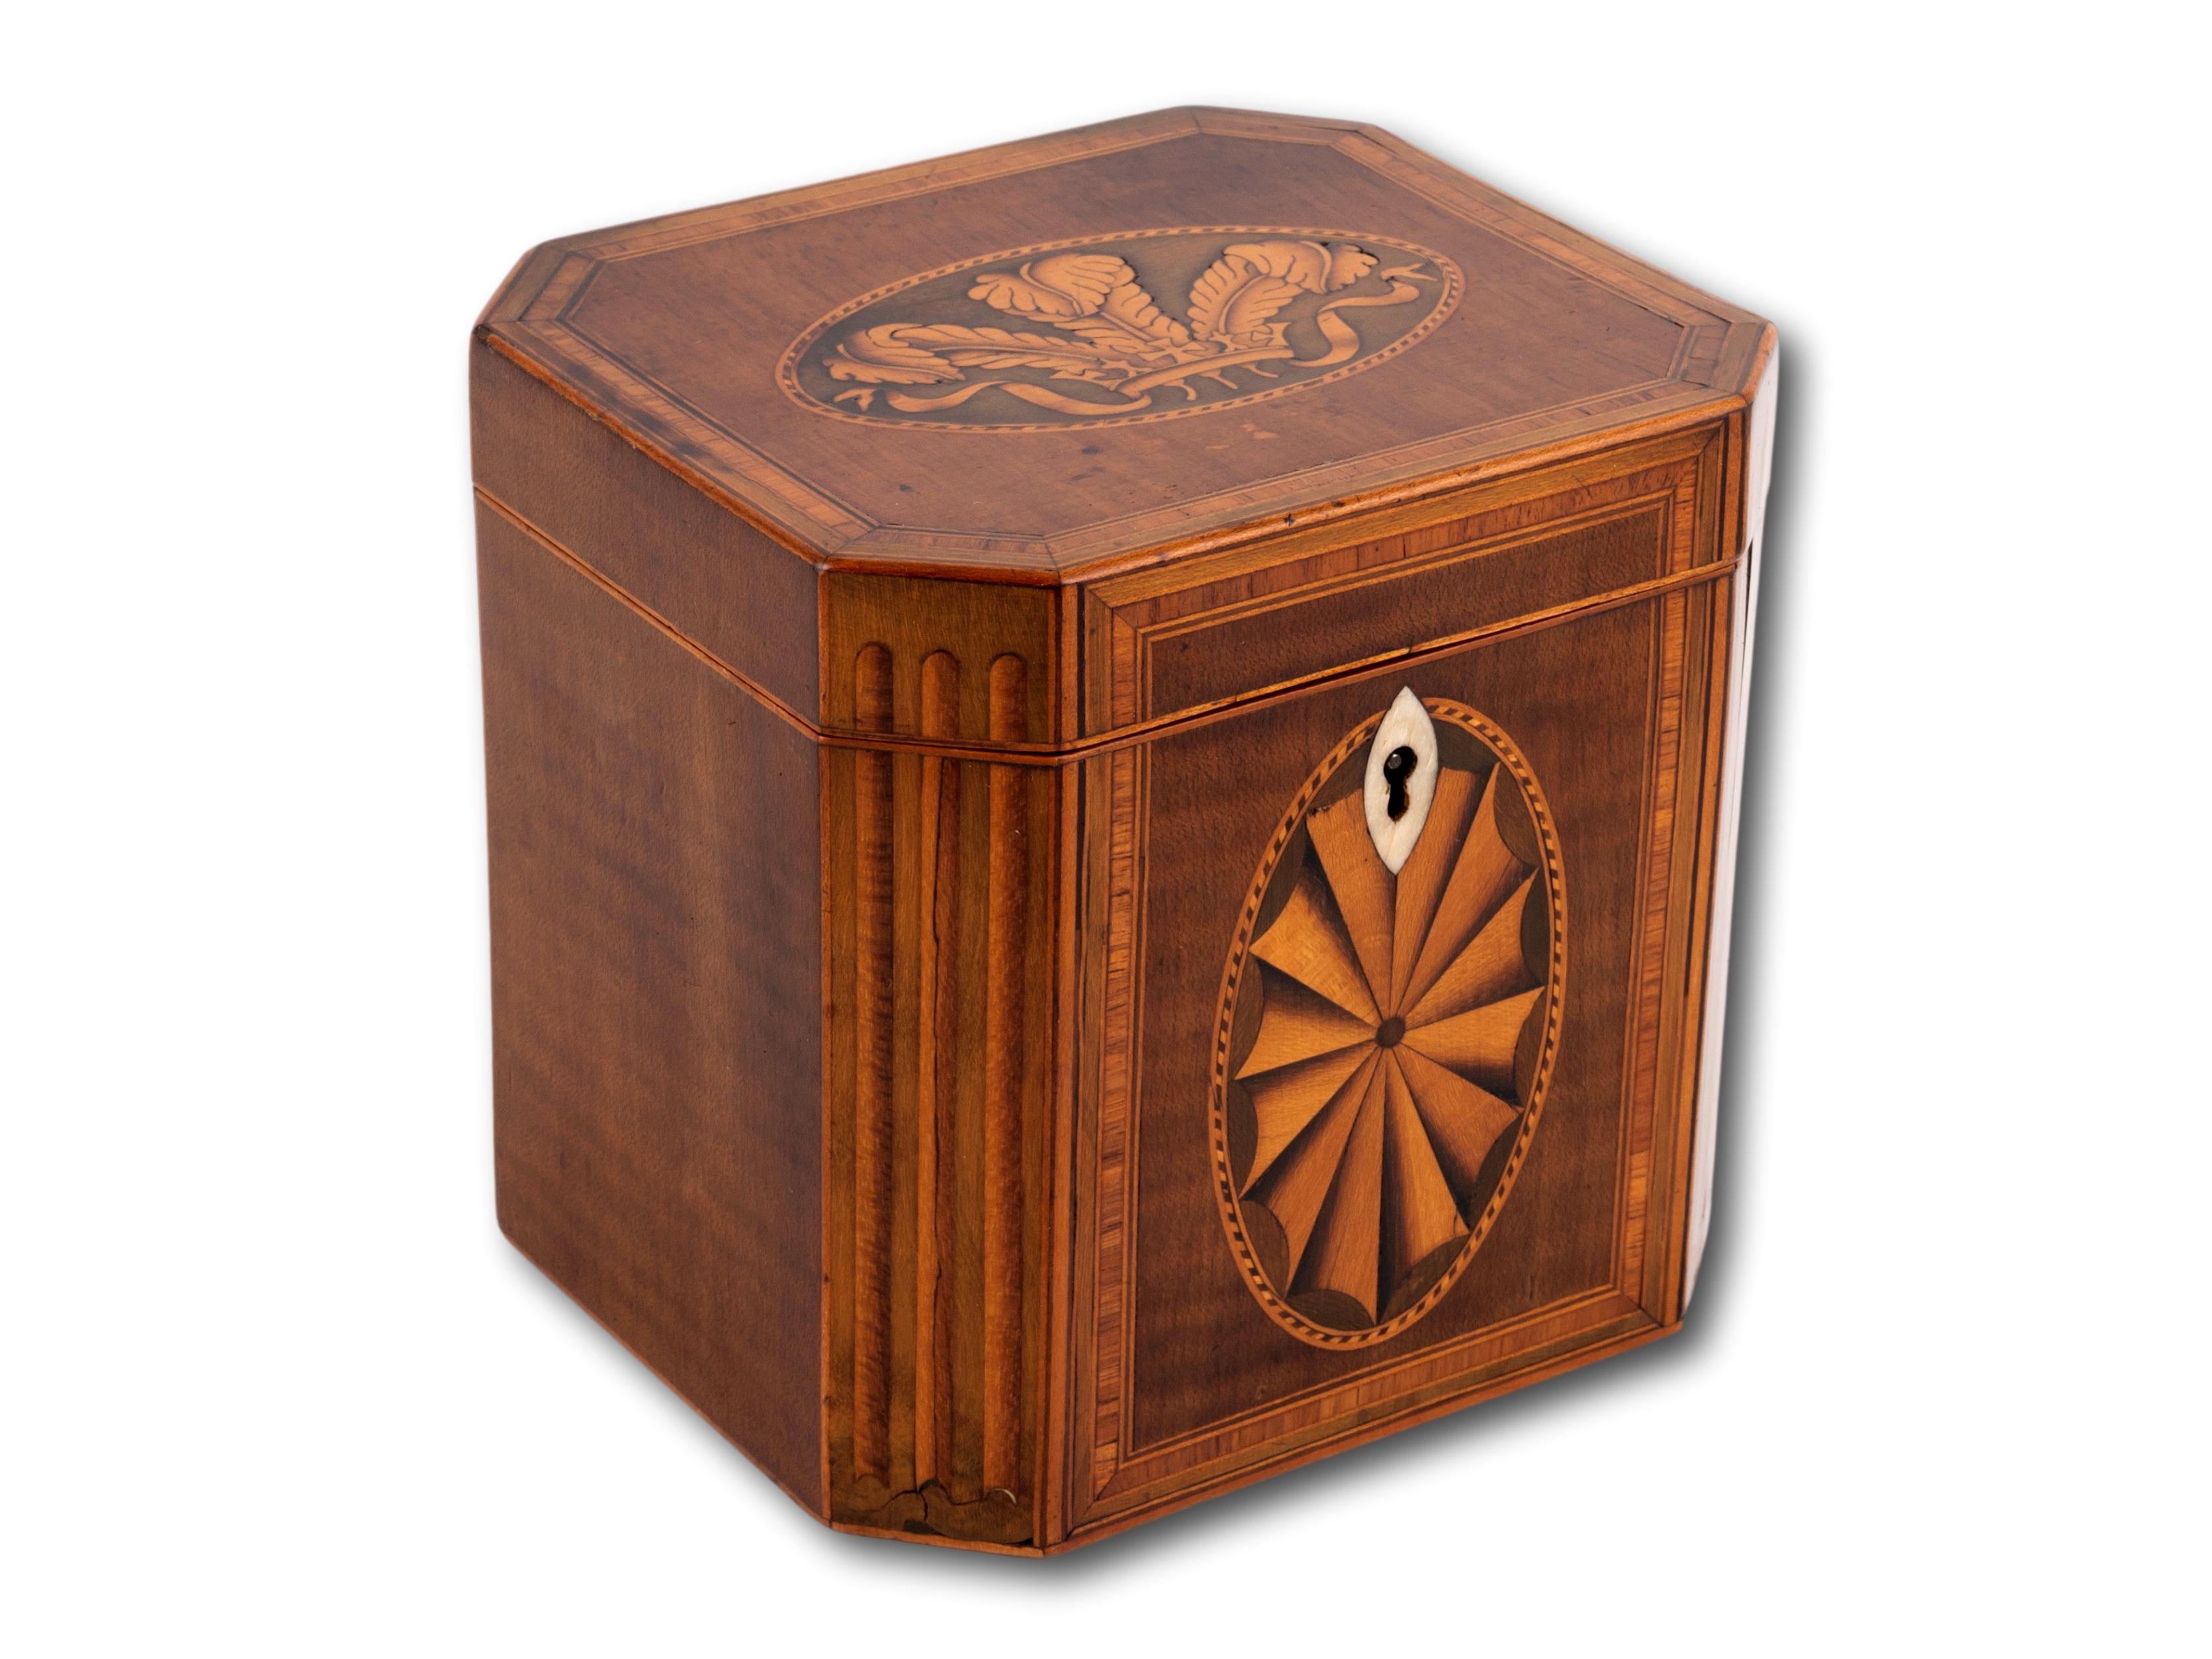 Hand-Carved Georgian Prince of Wales Feathers Harewood Tea Caddy For Sale